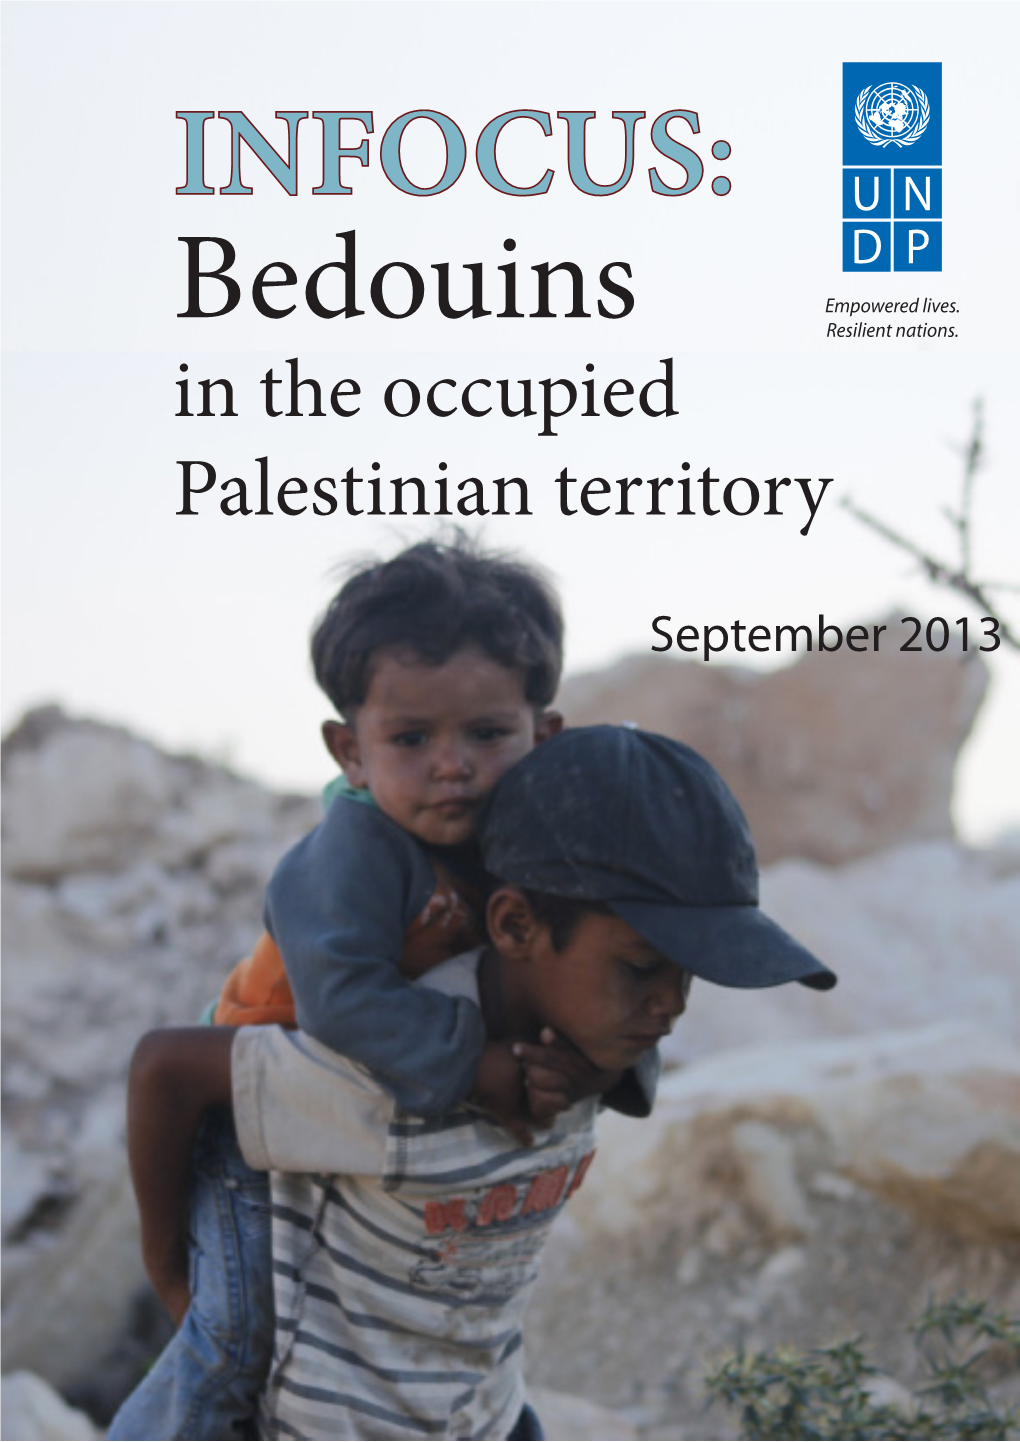 Bedouins in the Occupied Palestinian Territory